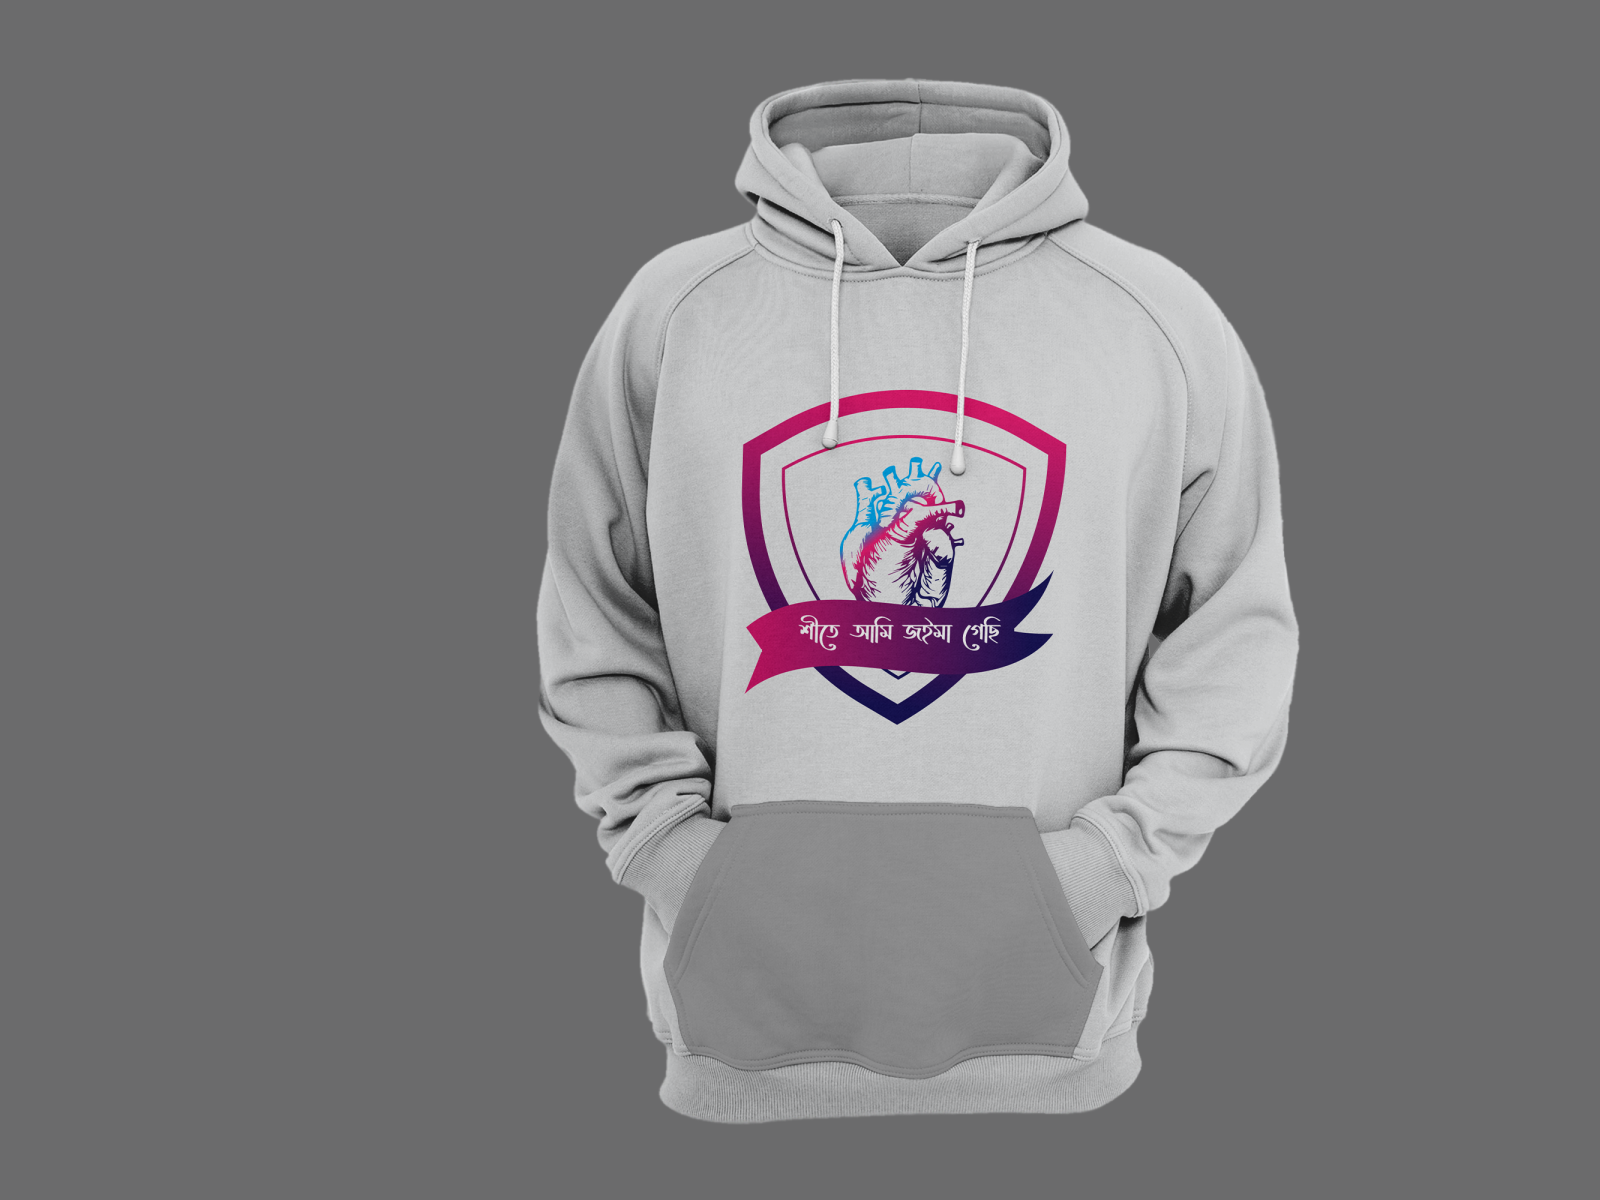 Download Hoodie Design by Md.Mamun on Dribbble